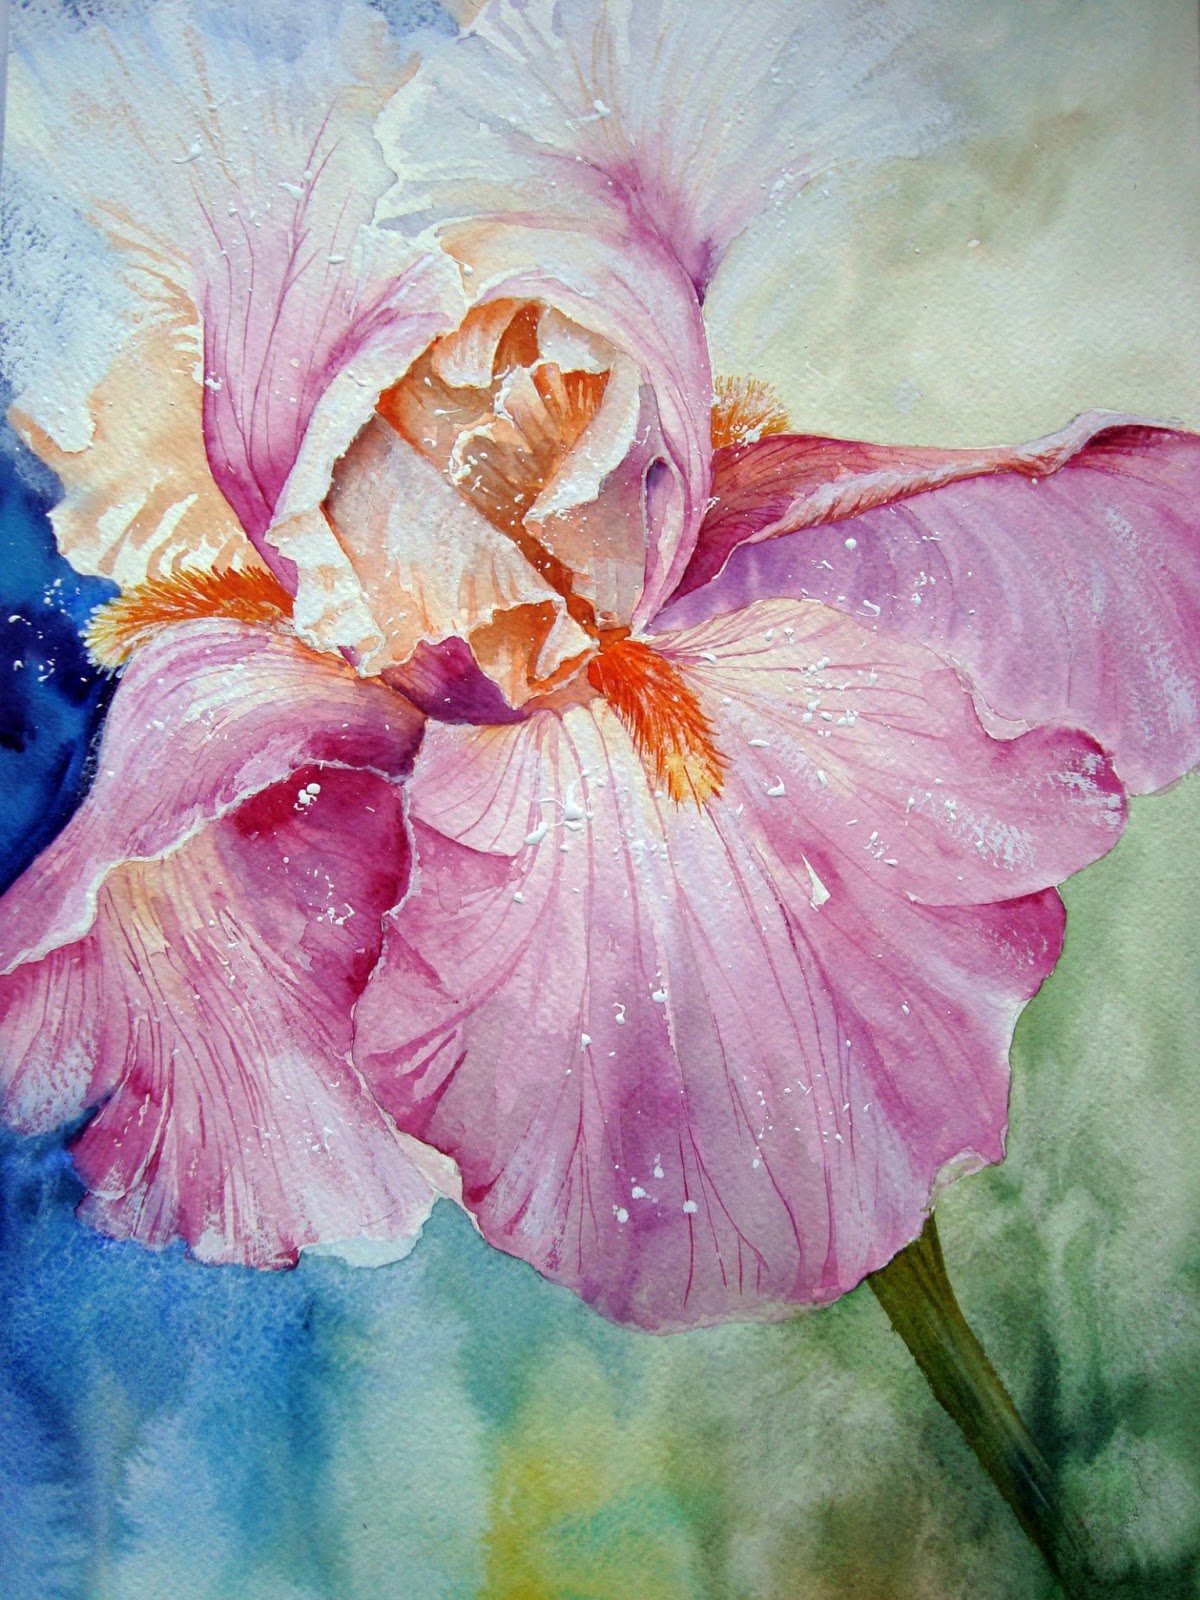 Watercolour Florals: Another Iris